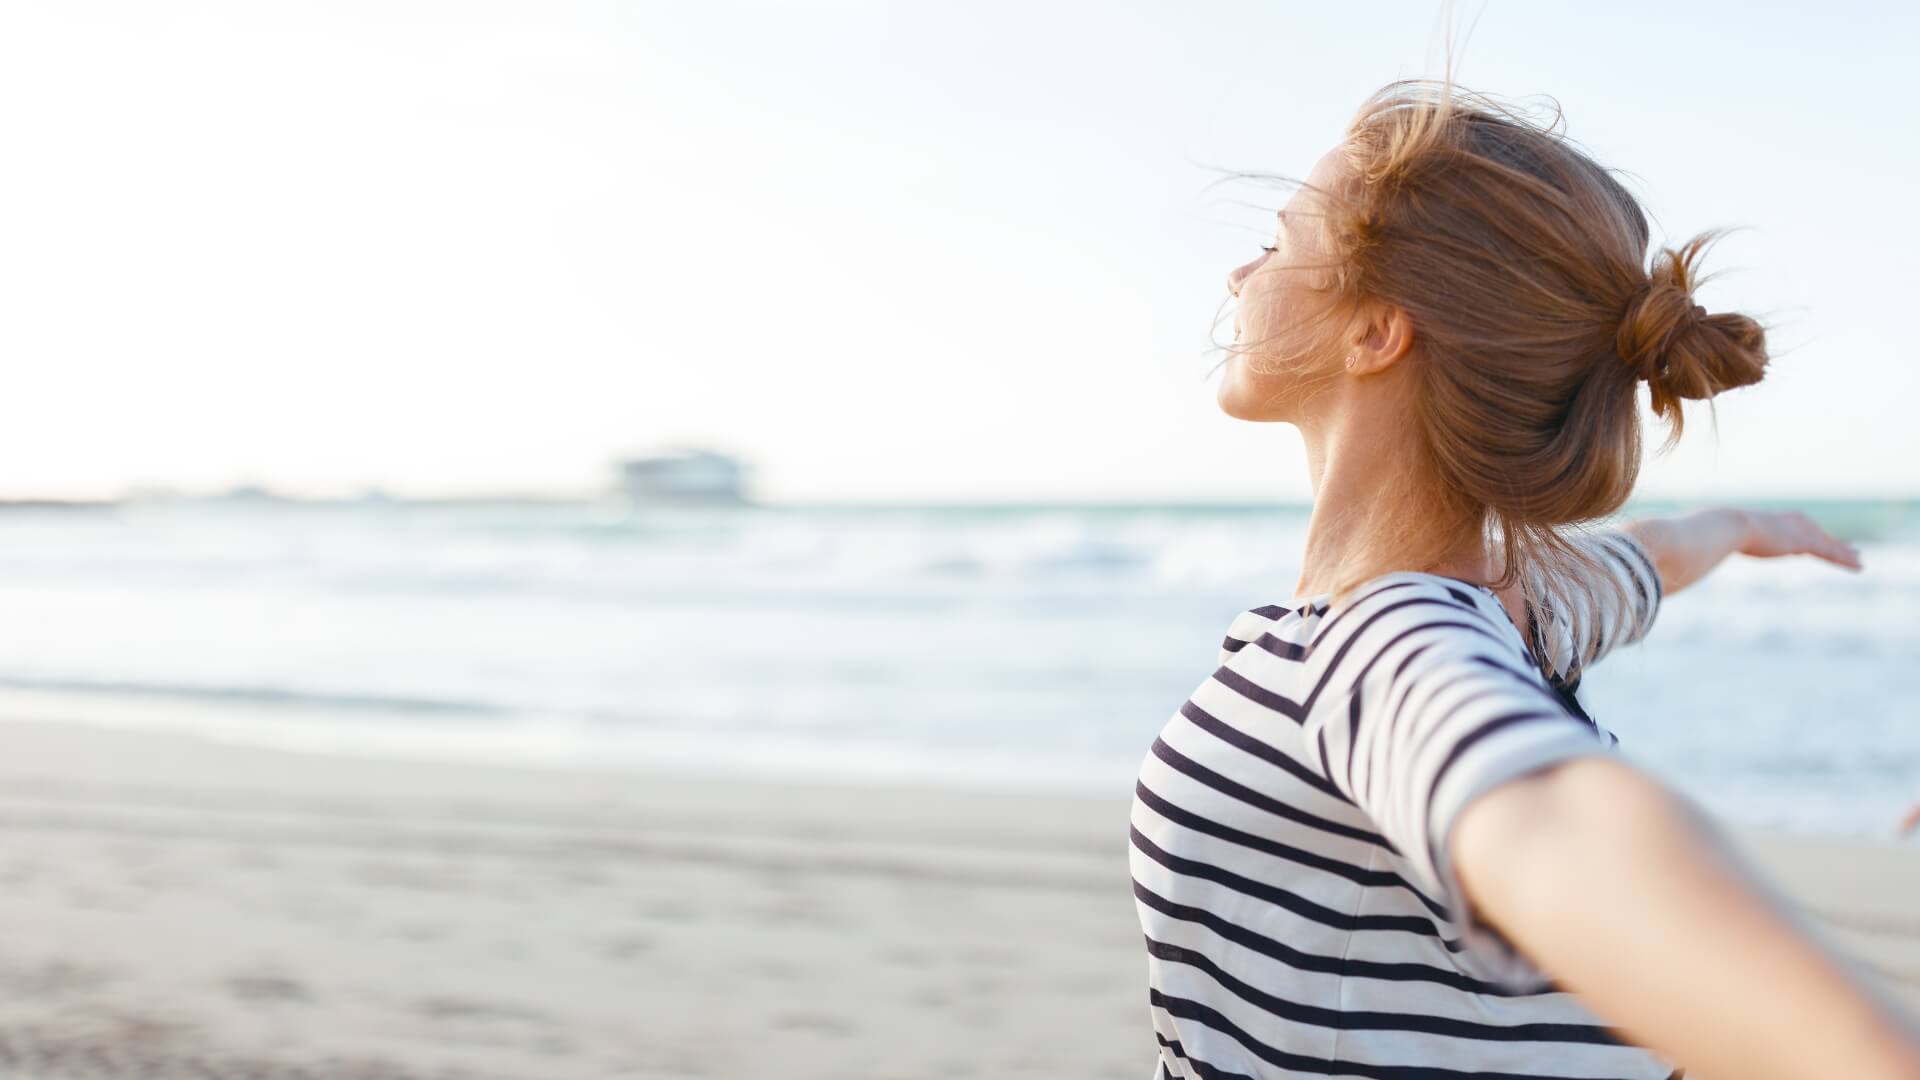 A woman at the beach with her arms spread out wide, embodying the abundance mindset.